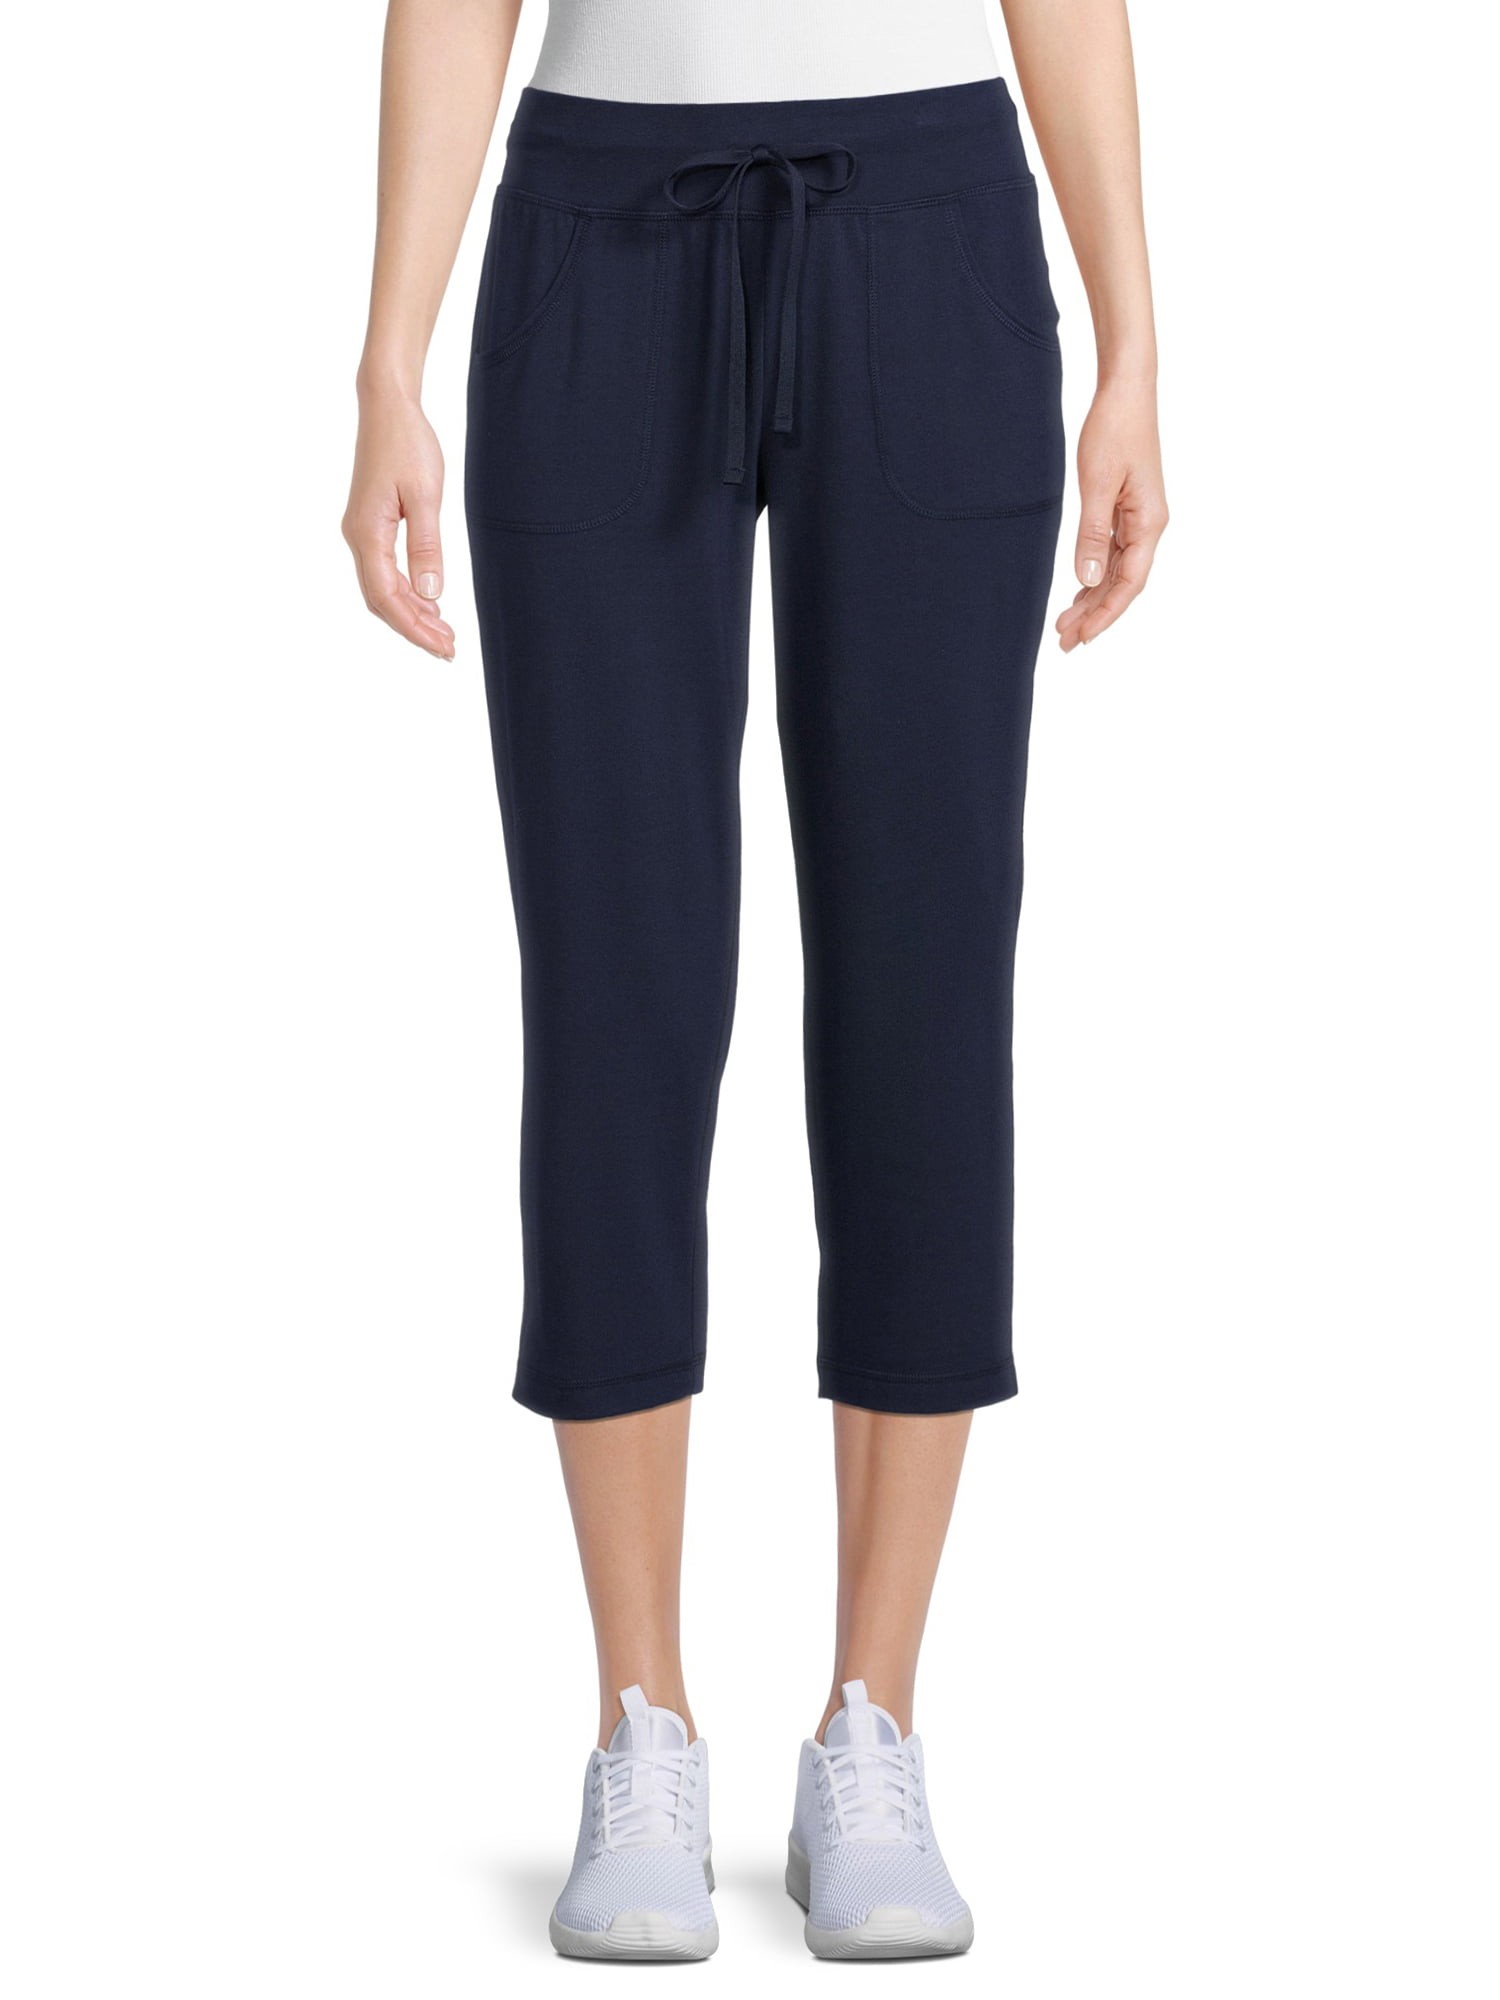 Athletic Works Women's Soft Joggers, Sizes XS-3XL 